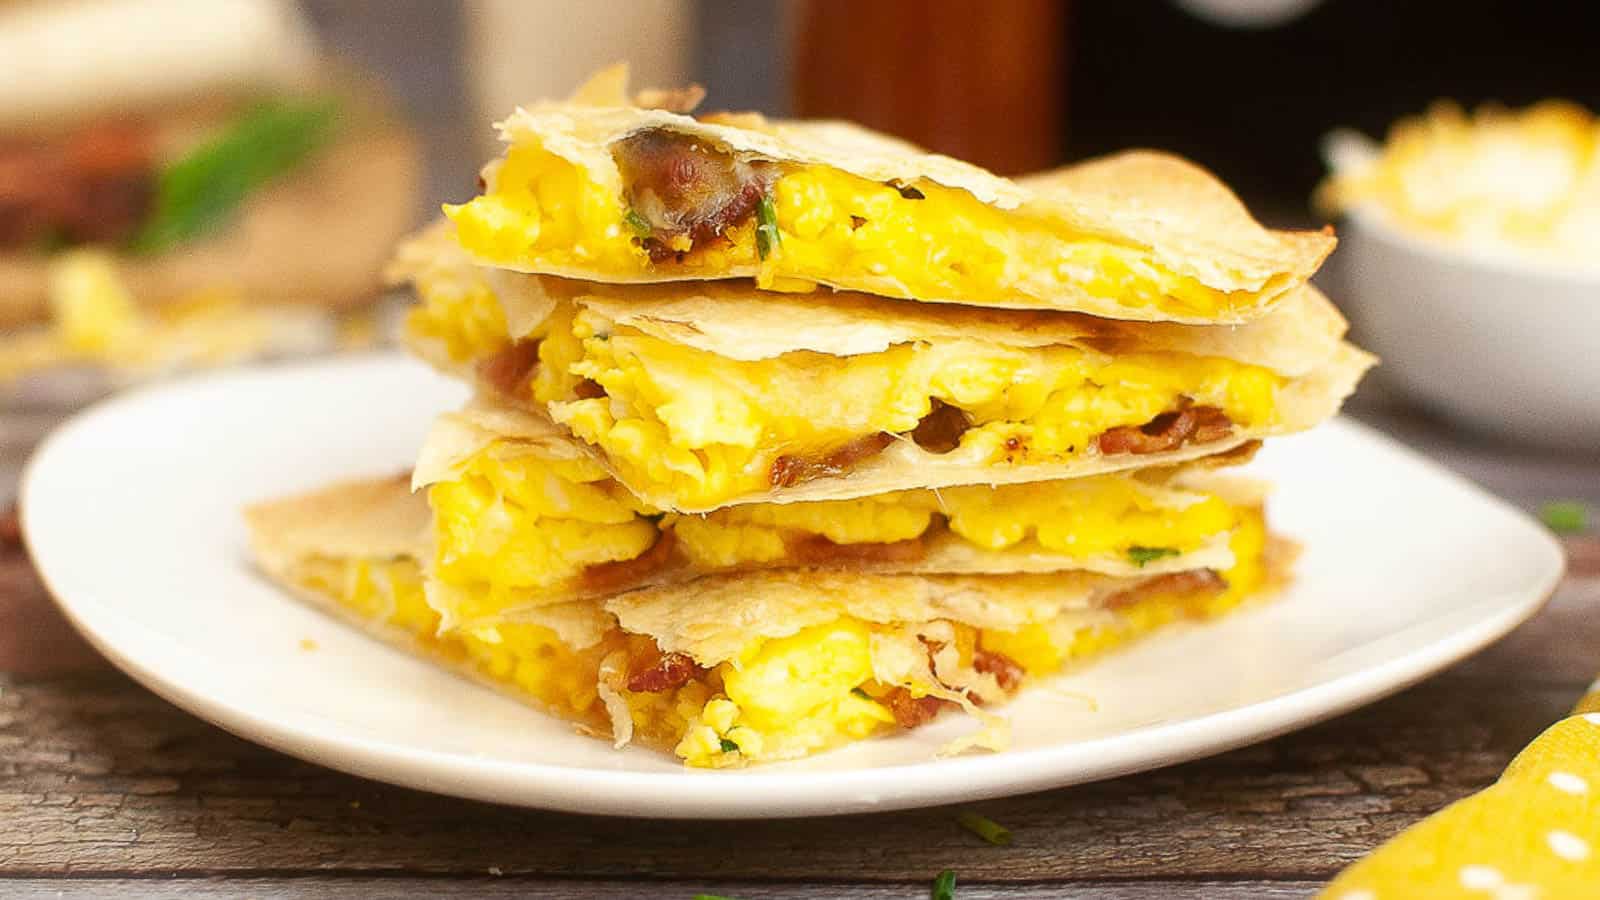 A stack of air fried breakfast quesadillas with bacon, and cheese on a plate, surrounded by ingredients and condiments on a wooden table.